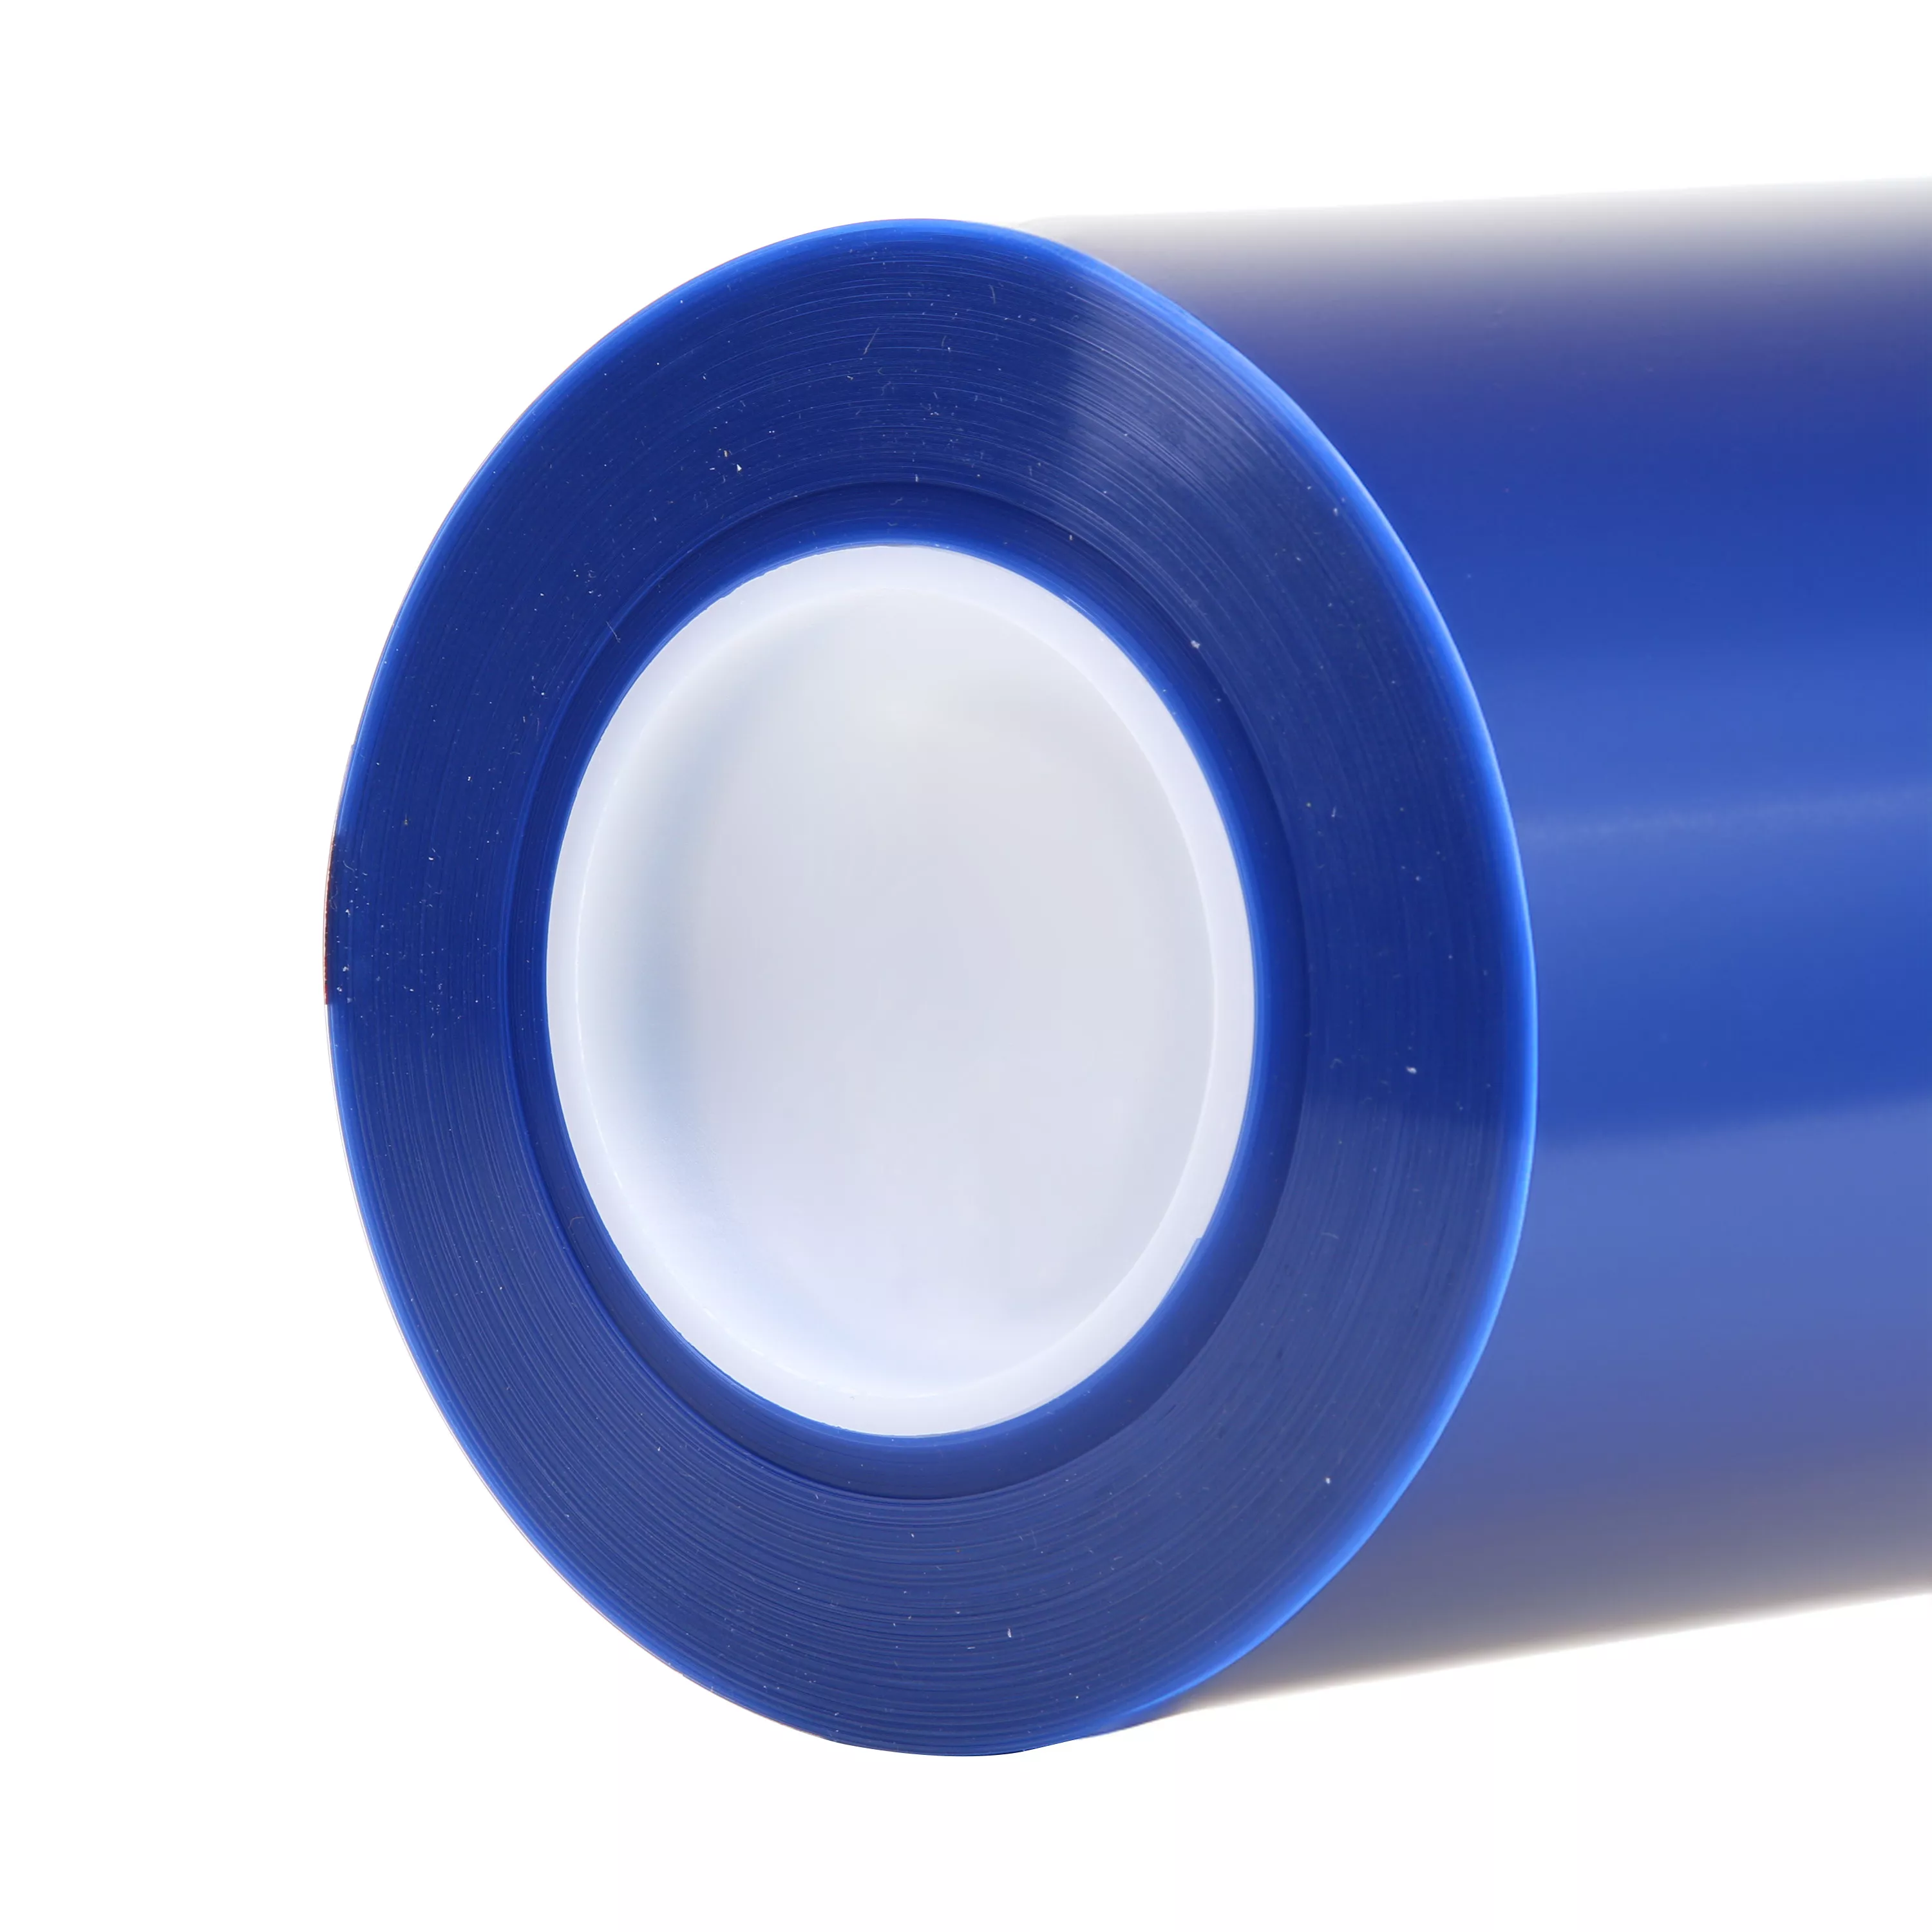 3M™ Polyester Tape 8905, Blue, 48 in x 72 yd, 6.4 mil, 1 Roll/Case,
Plastic Core